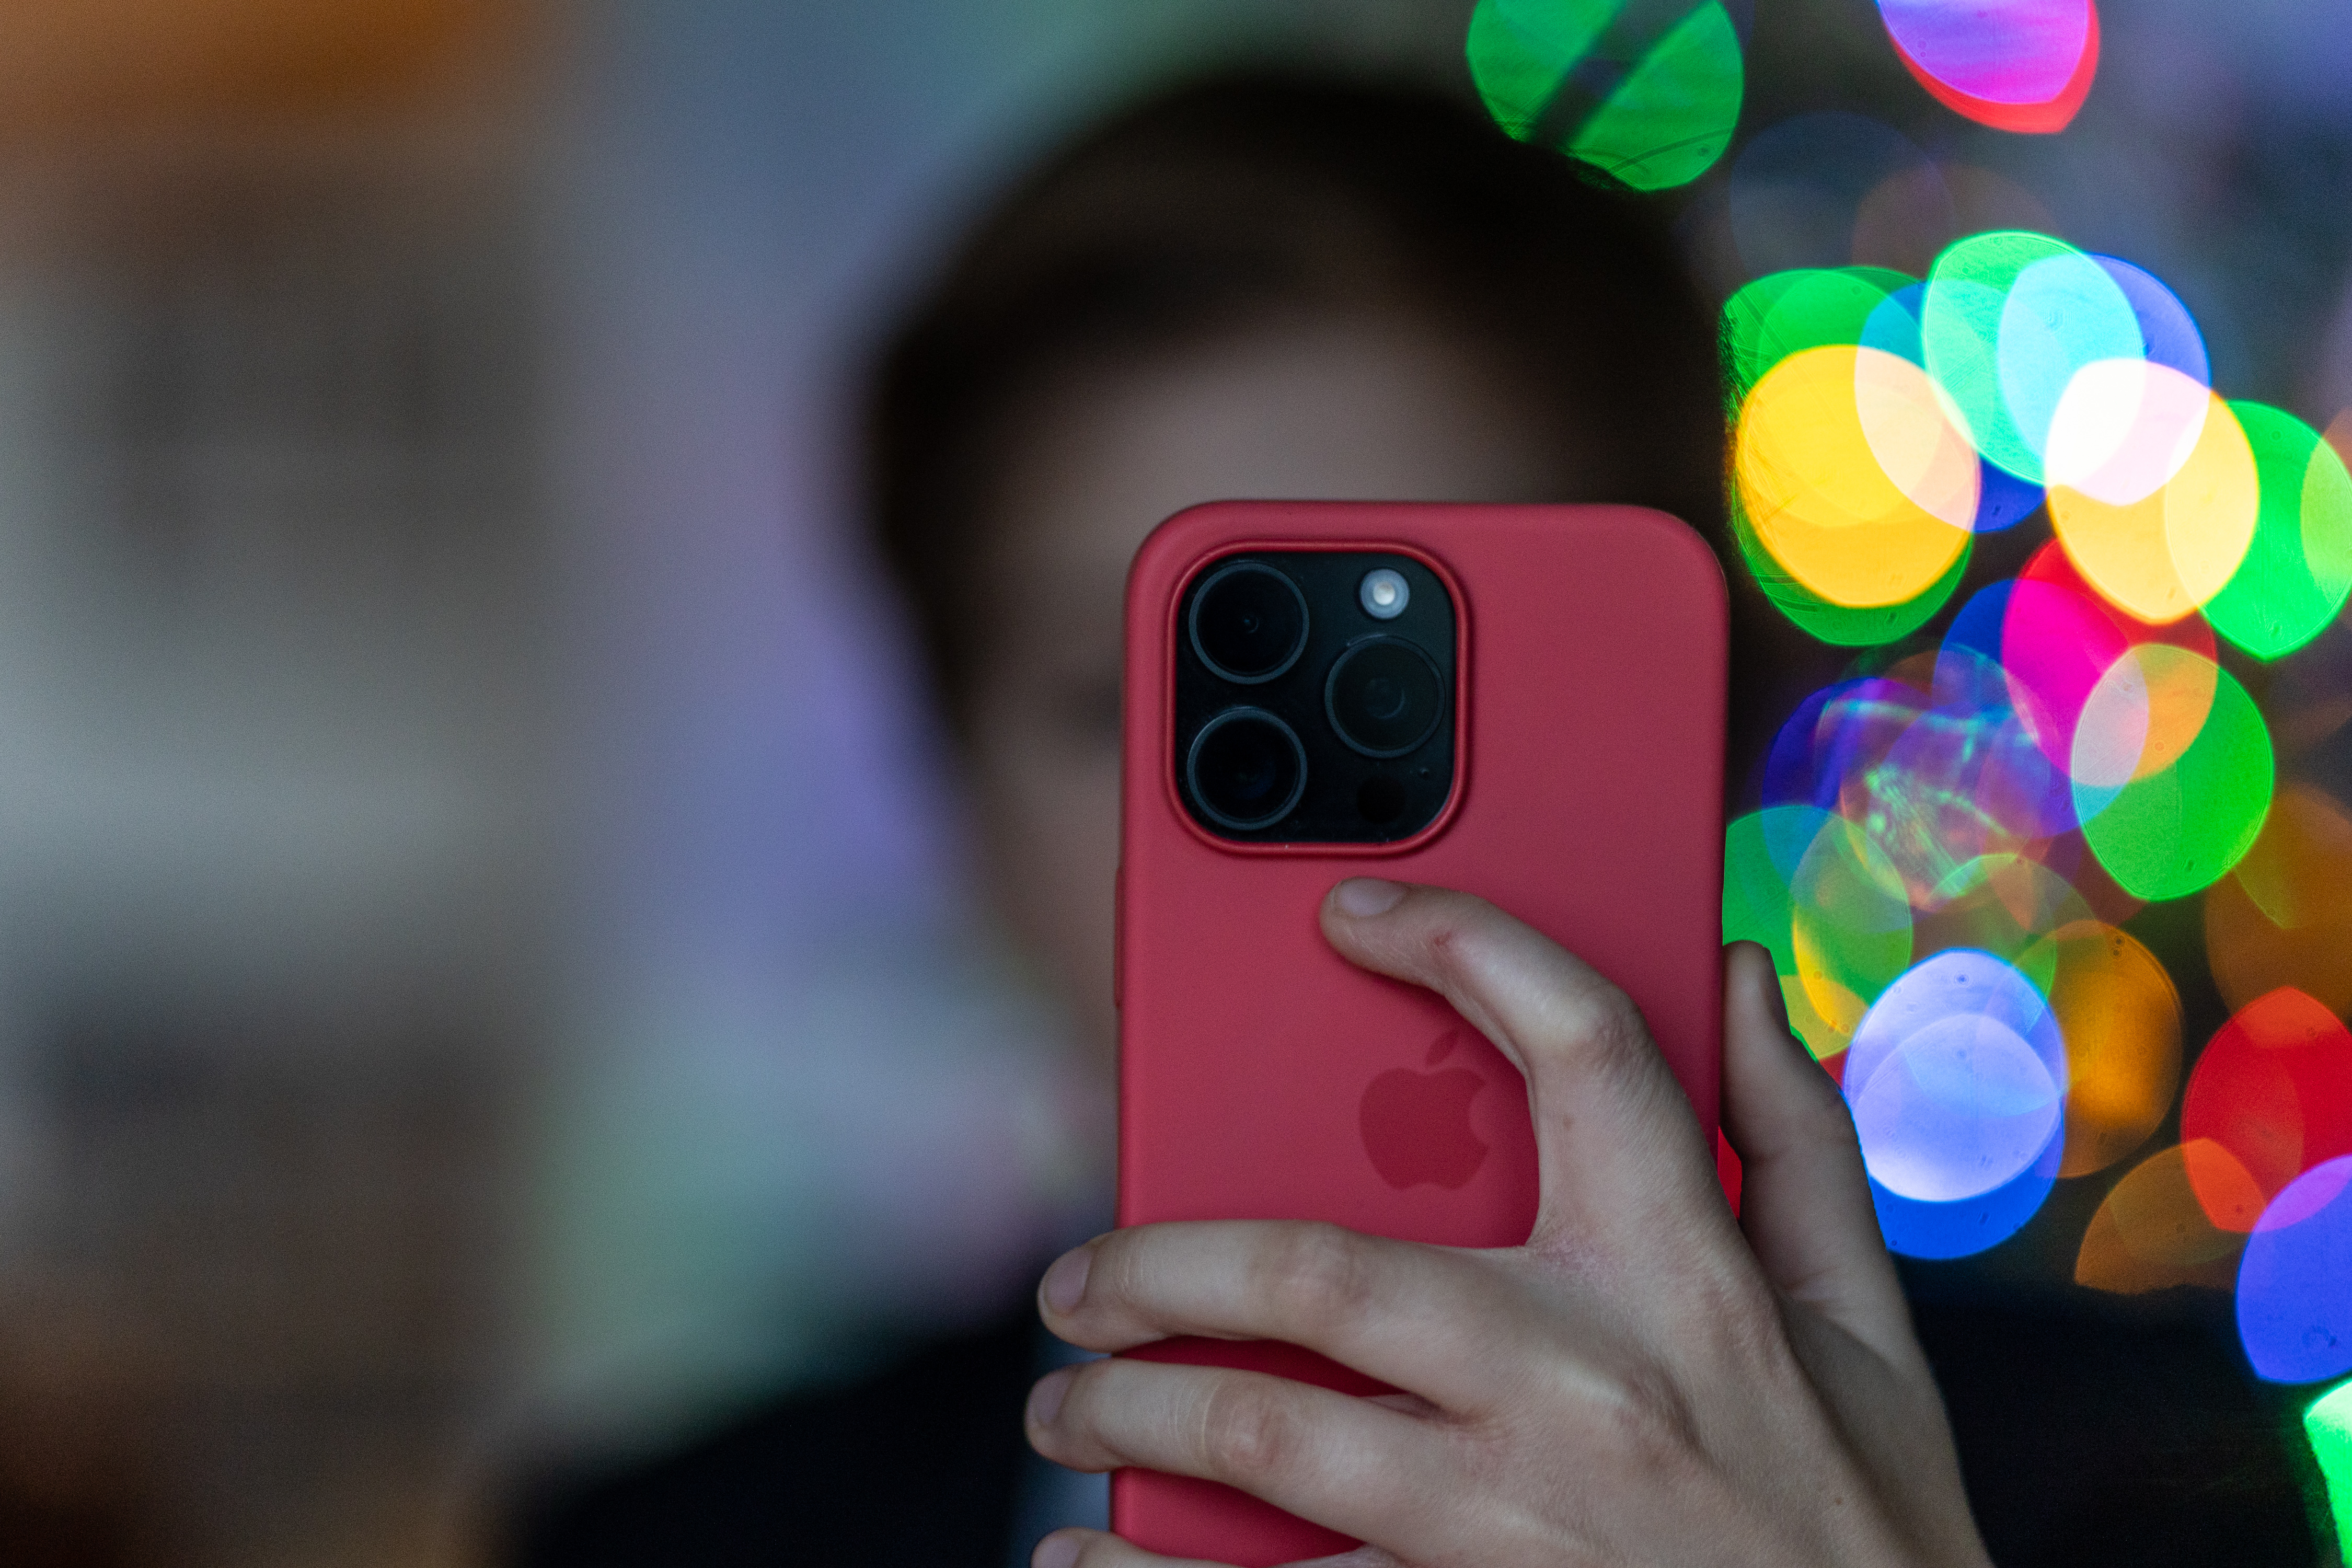 A child whose face is blurred into the background holds up a cell phone.